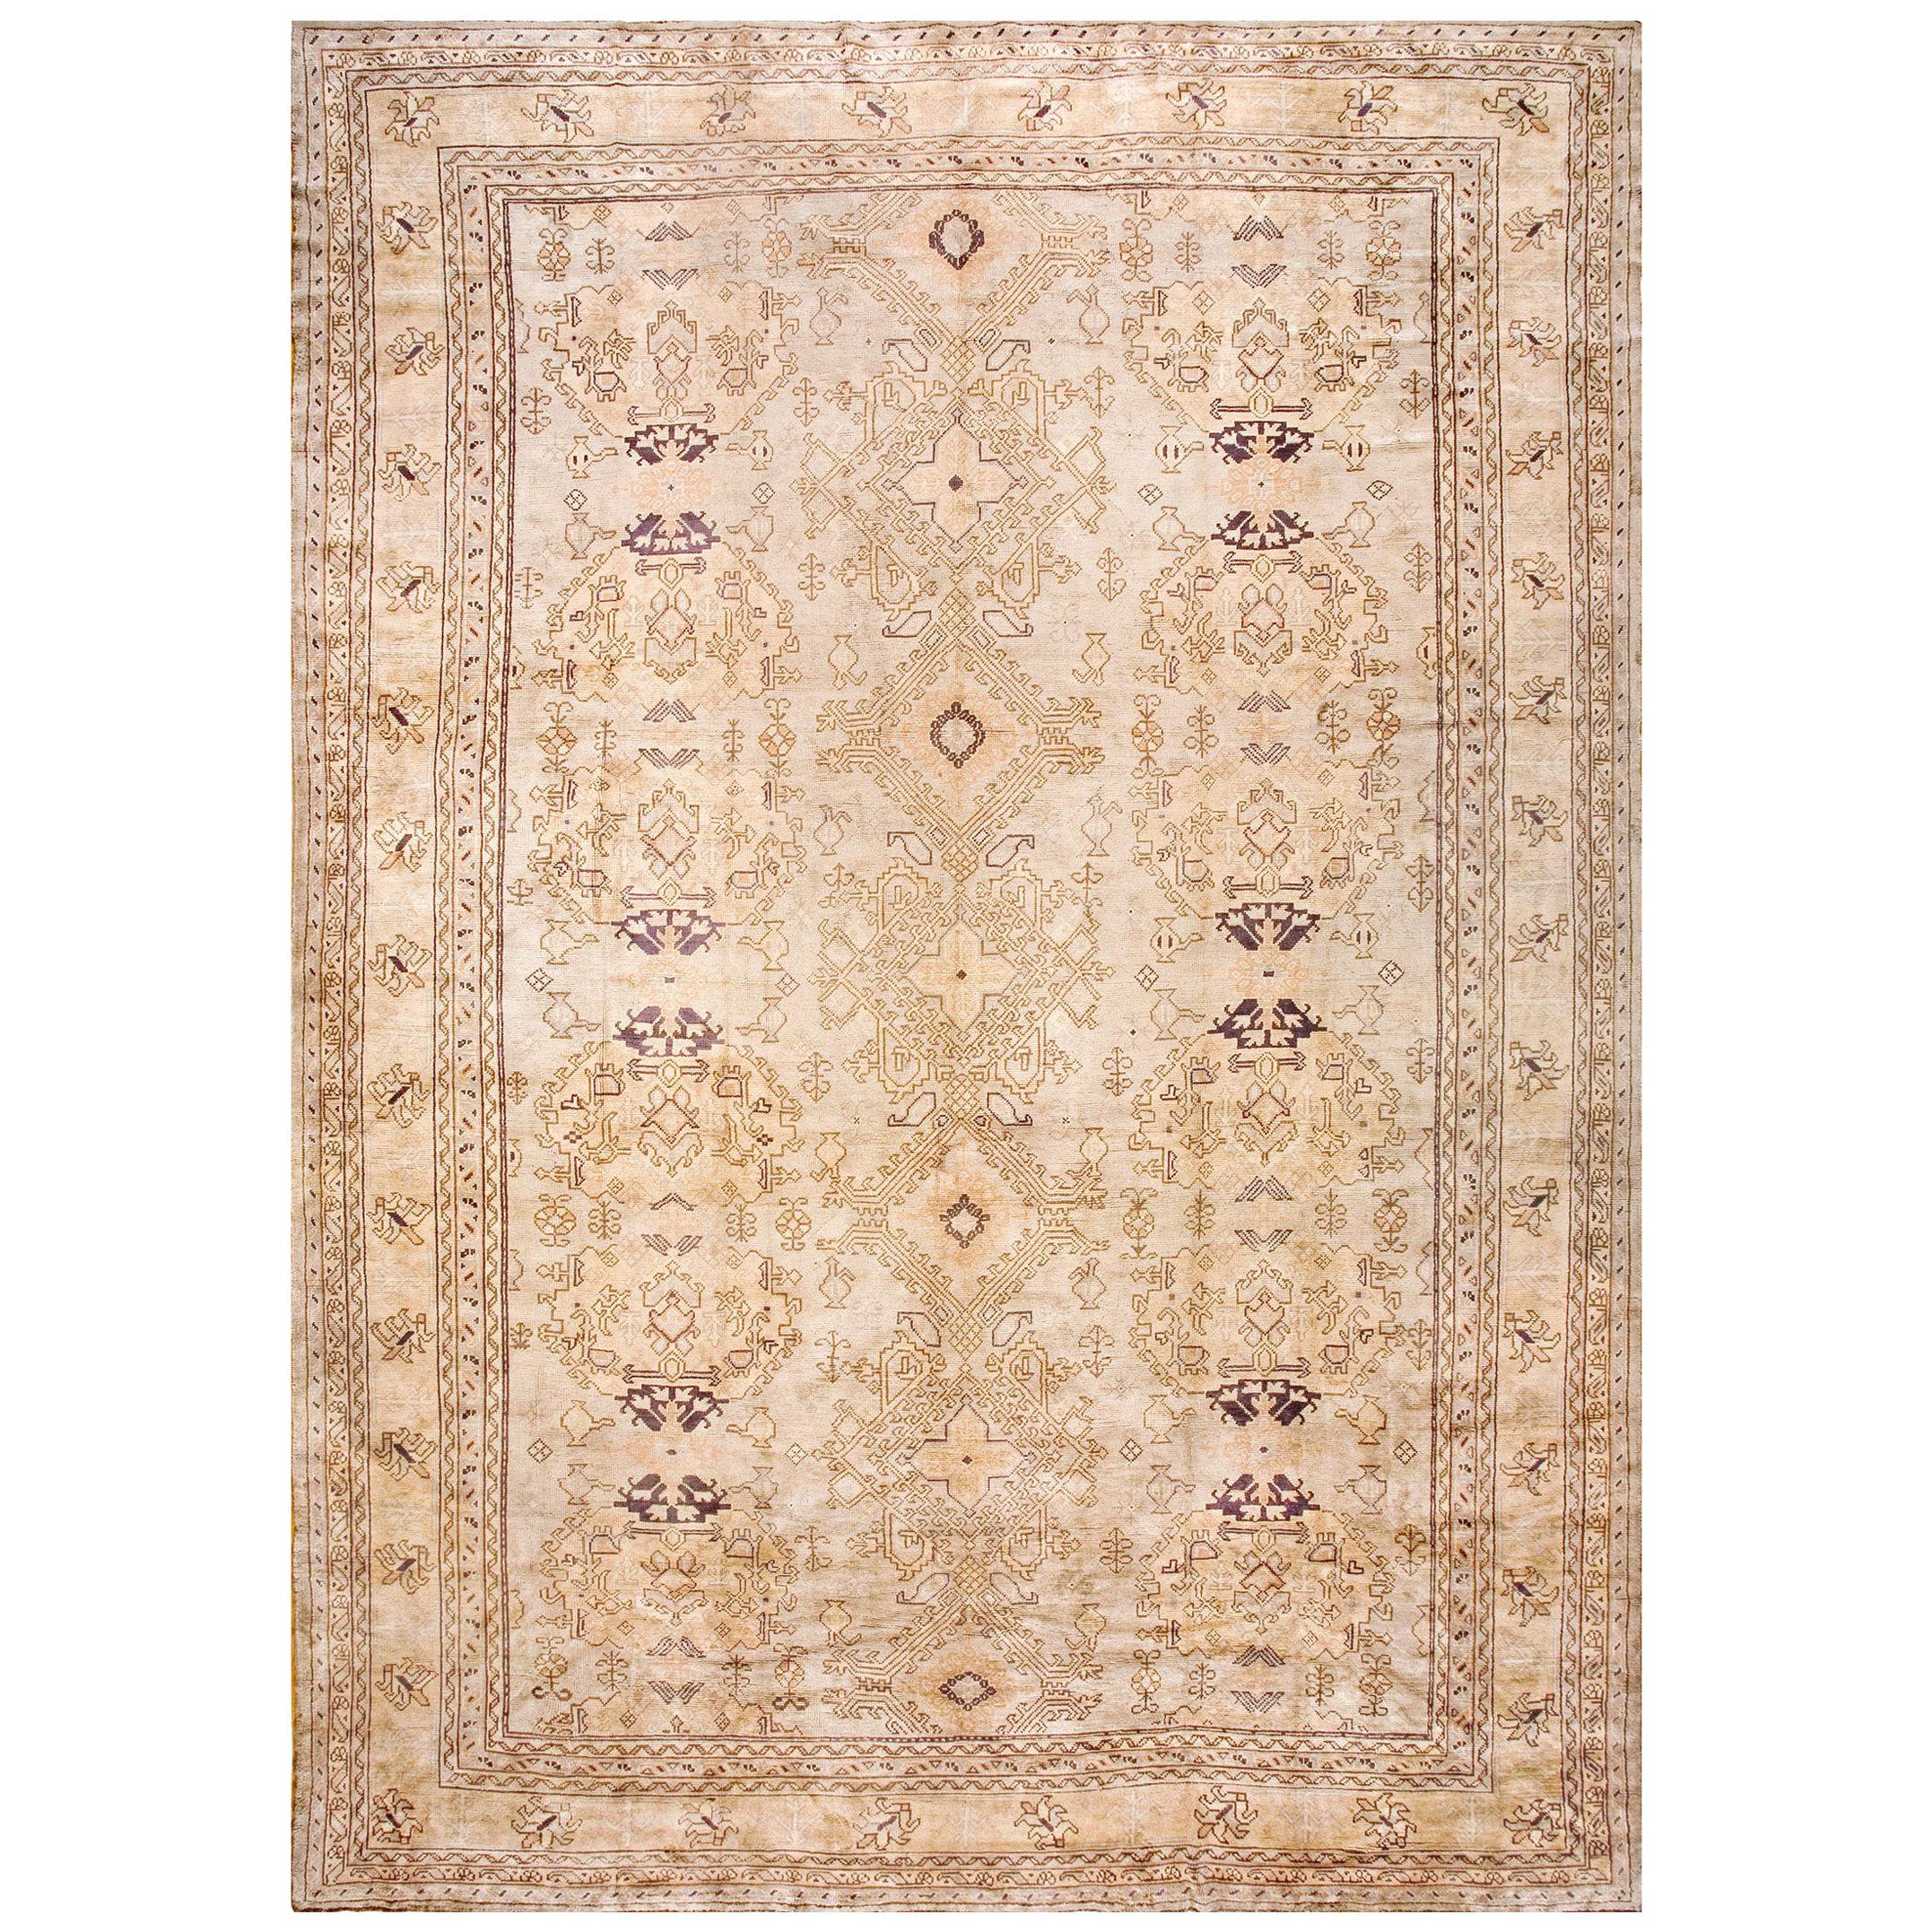 Early 20th Century Turkish Oushak Carpet ( 13' x 18'4" - 395 x 560 ) For Sale